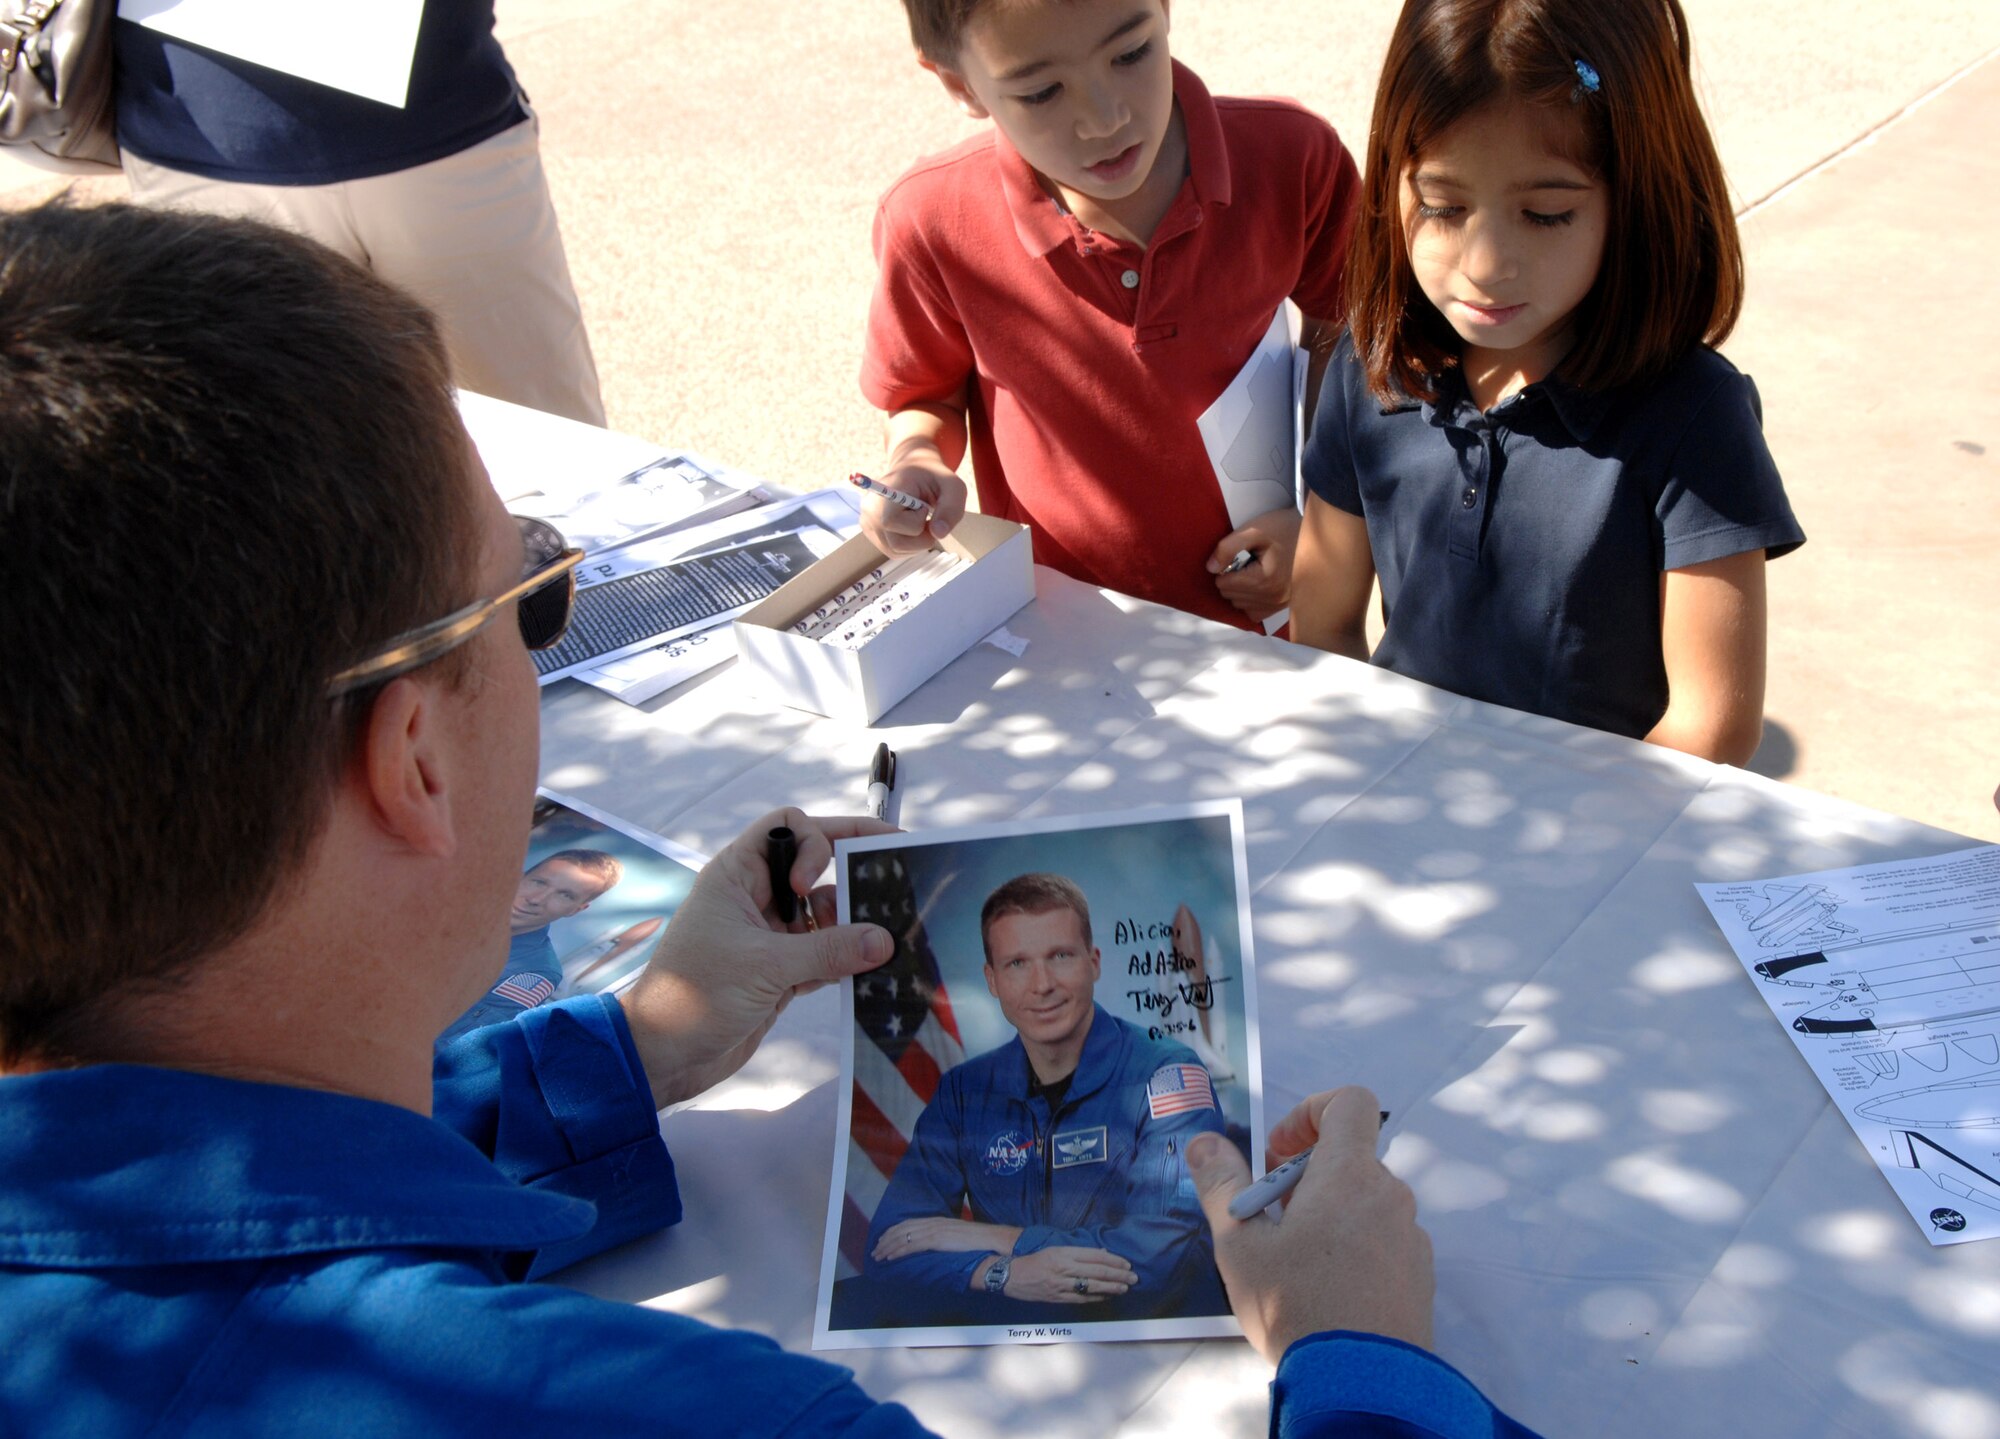 NASA Astronaut Lt. Col. Terry Virts autographs a photo March 20 during Air Force Week at the Arizona Science Center in downtown Phoenix.  Colonel Virts answered questions about his role as an astronaut and Air Force member.  (U.S. Air Force photo/Staff Sgt. Brian Ferguson)